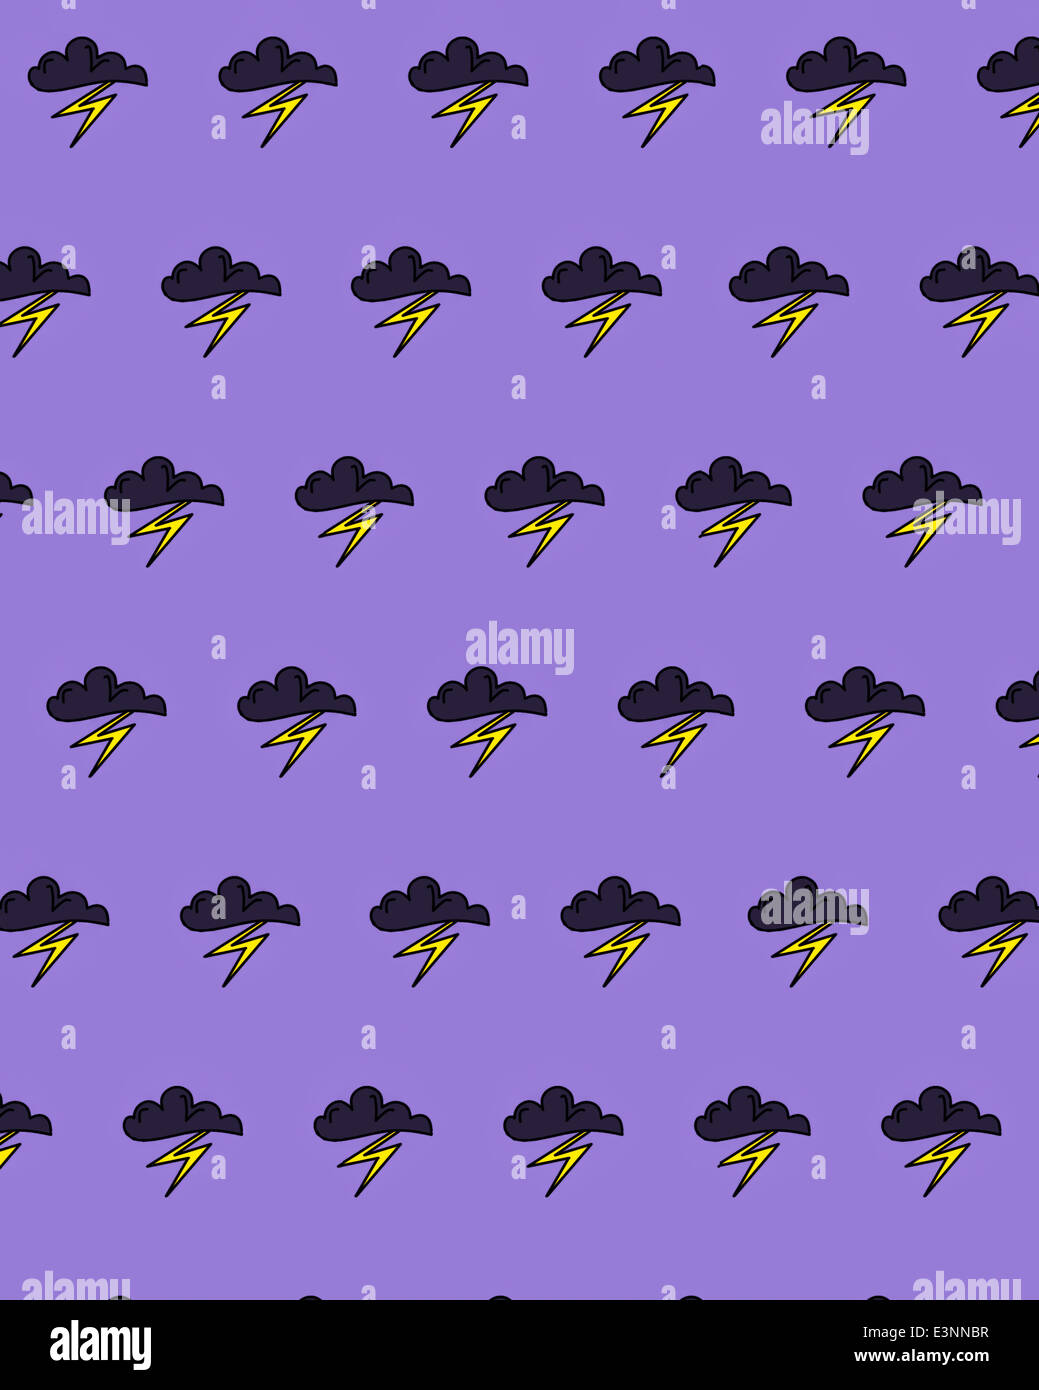 Illustration of Thunder clouds and lightning on a repetitive wallpaper design Stock Photo